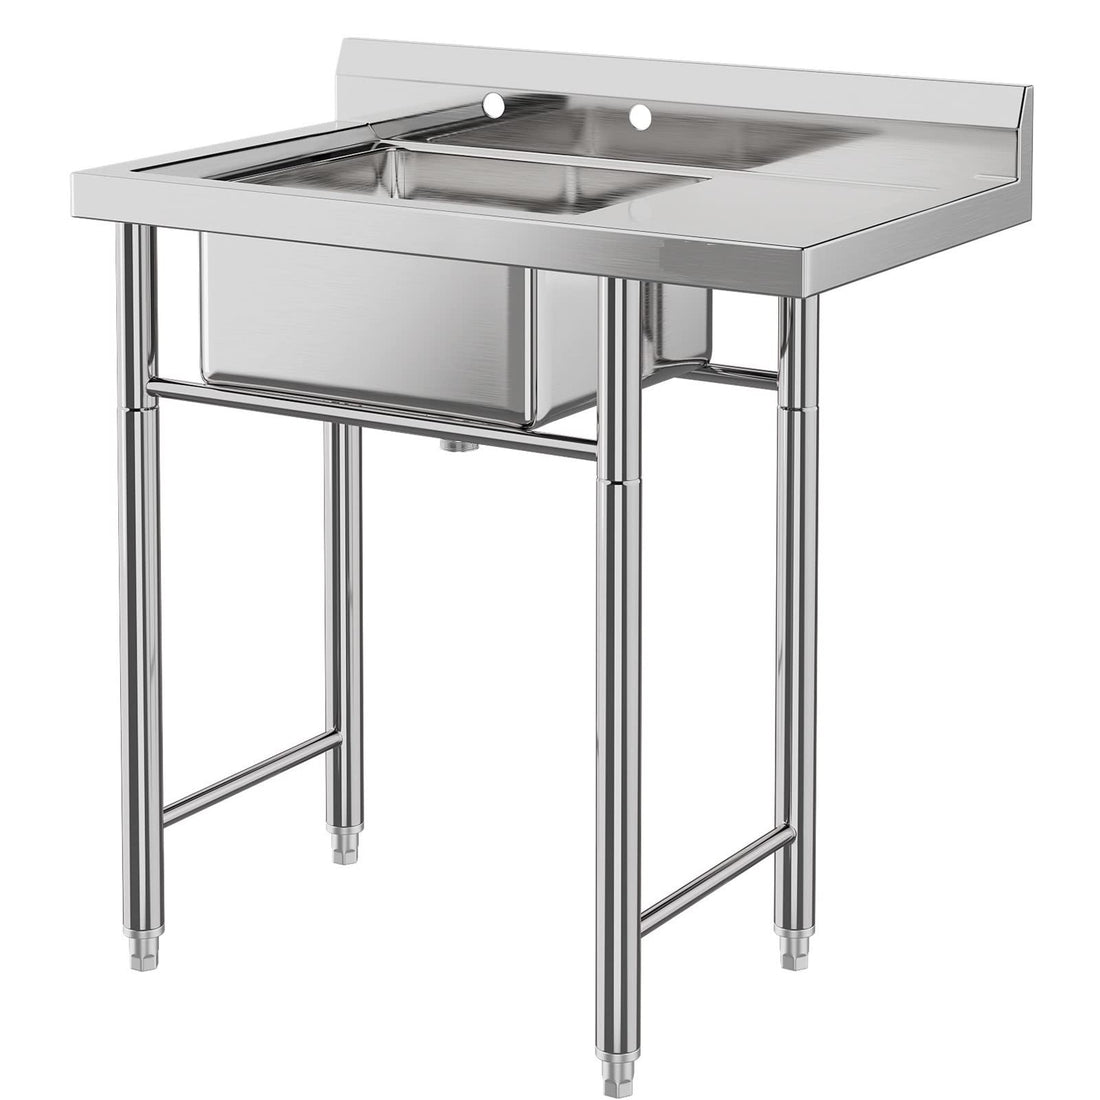 1-Compartment Stainless Sink, Anti-Leak, for Commercial Kitchens